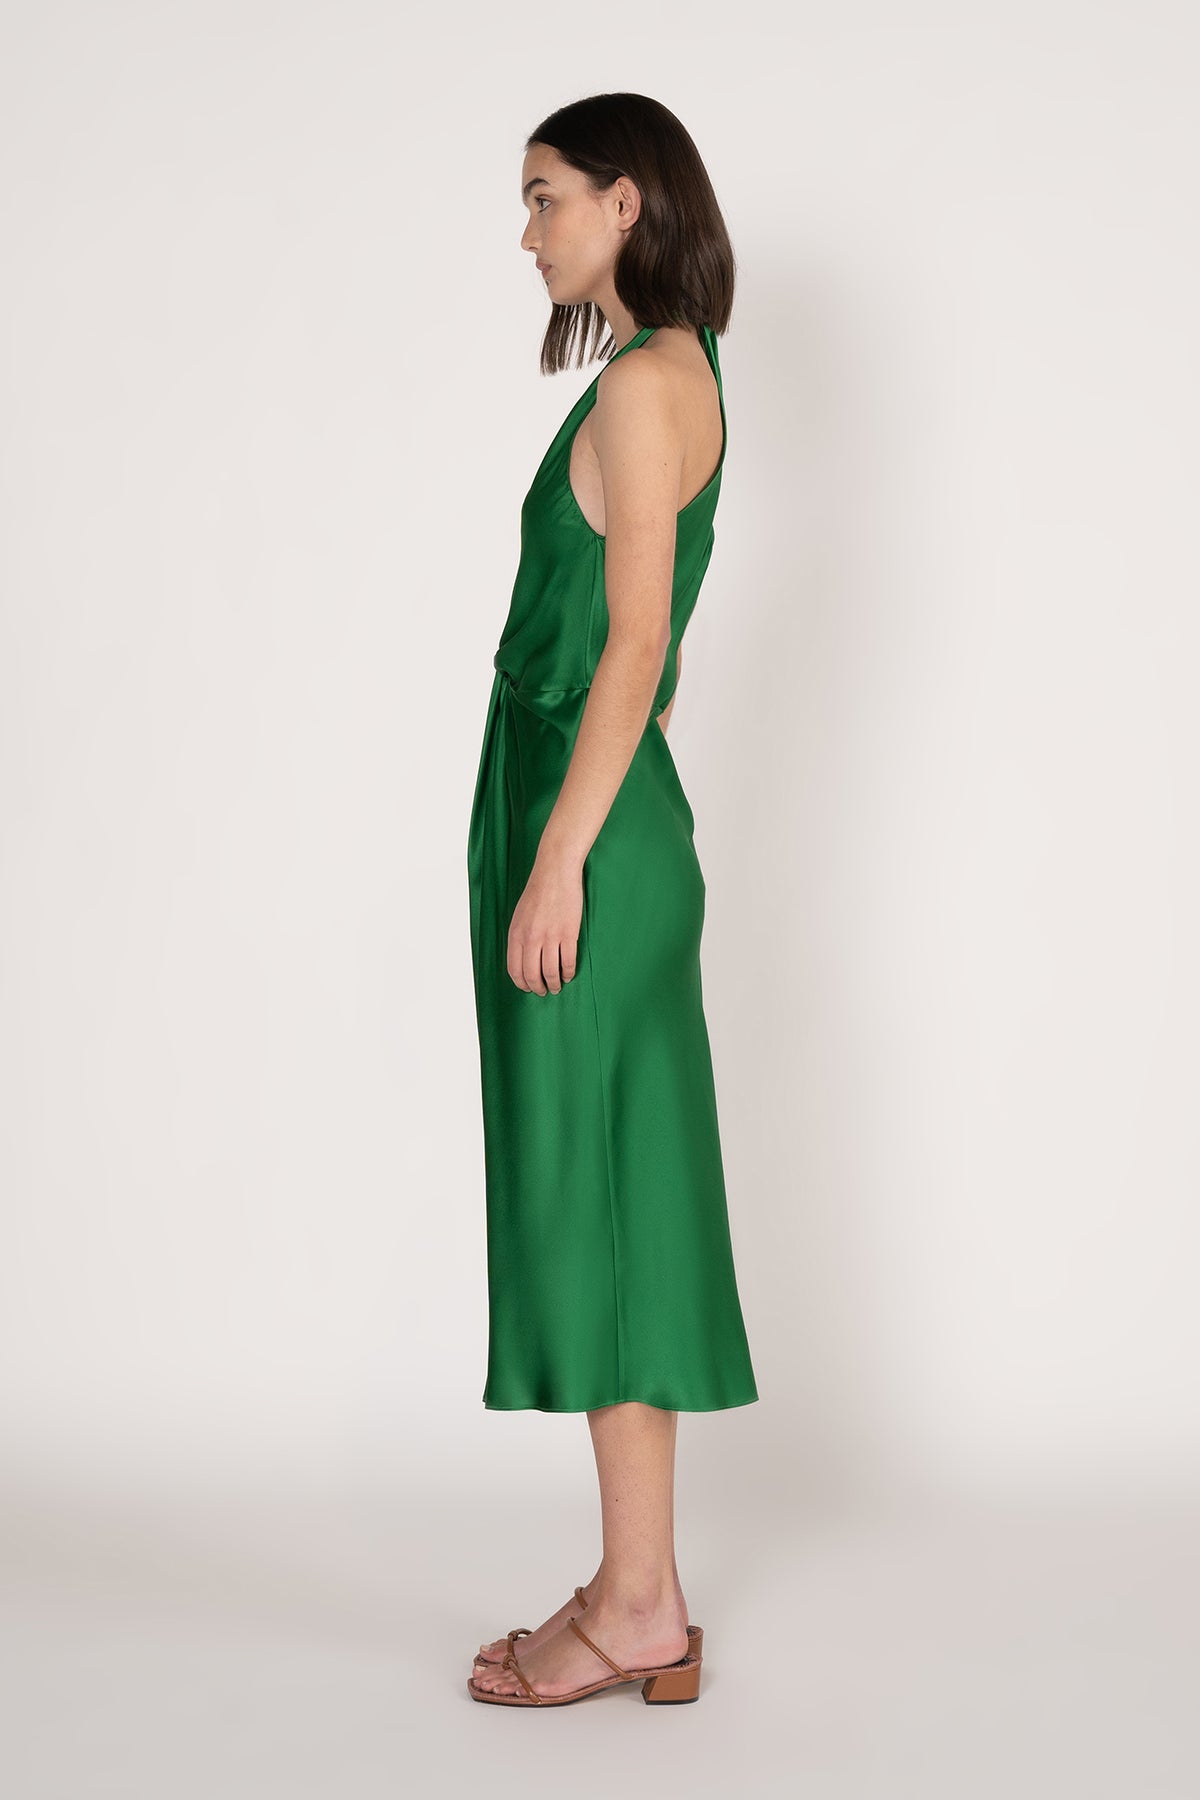 Lucia Knot Front Dress